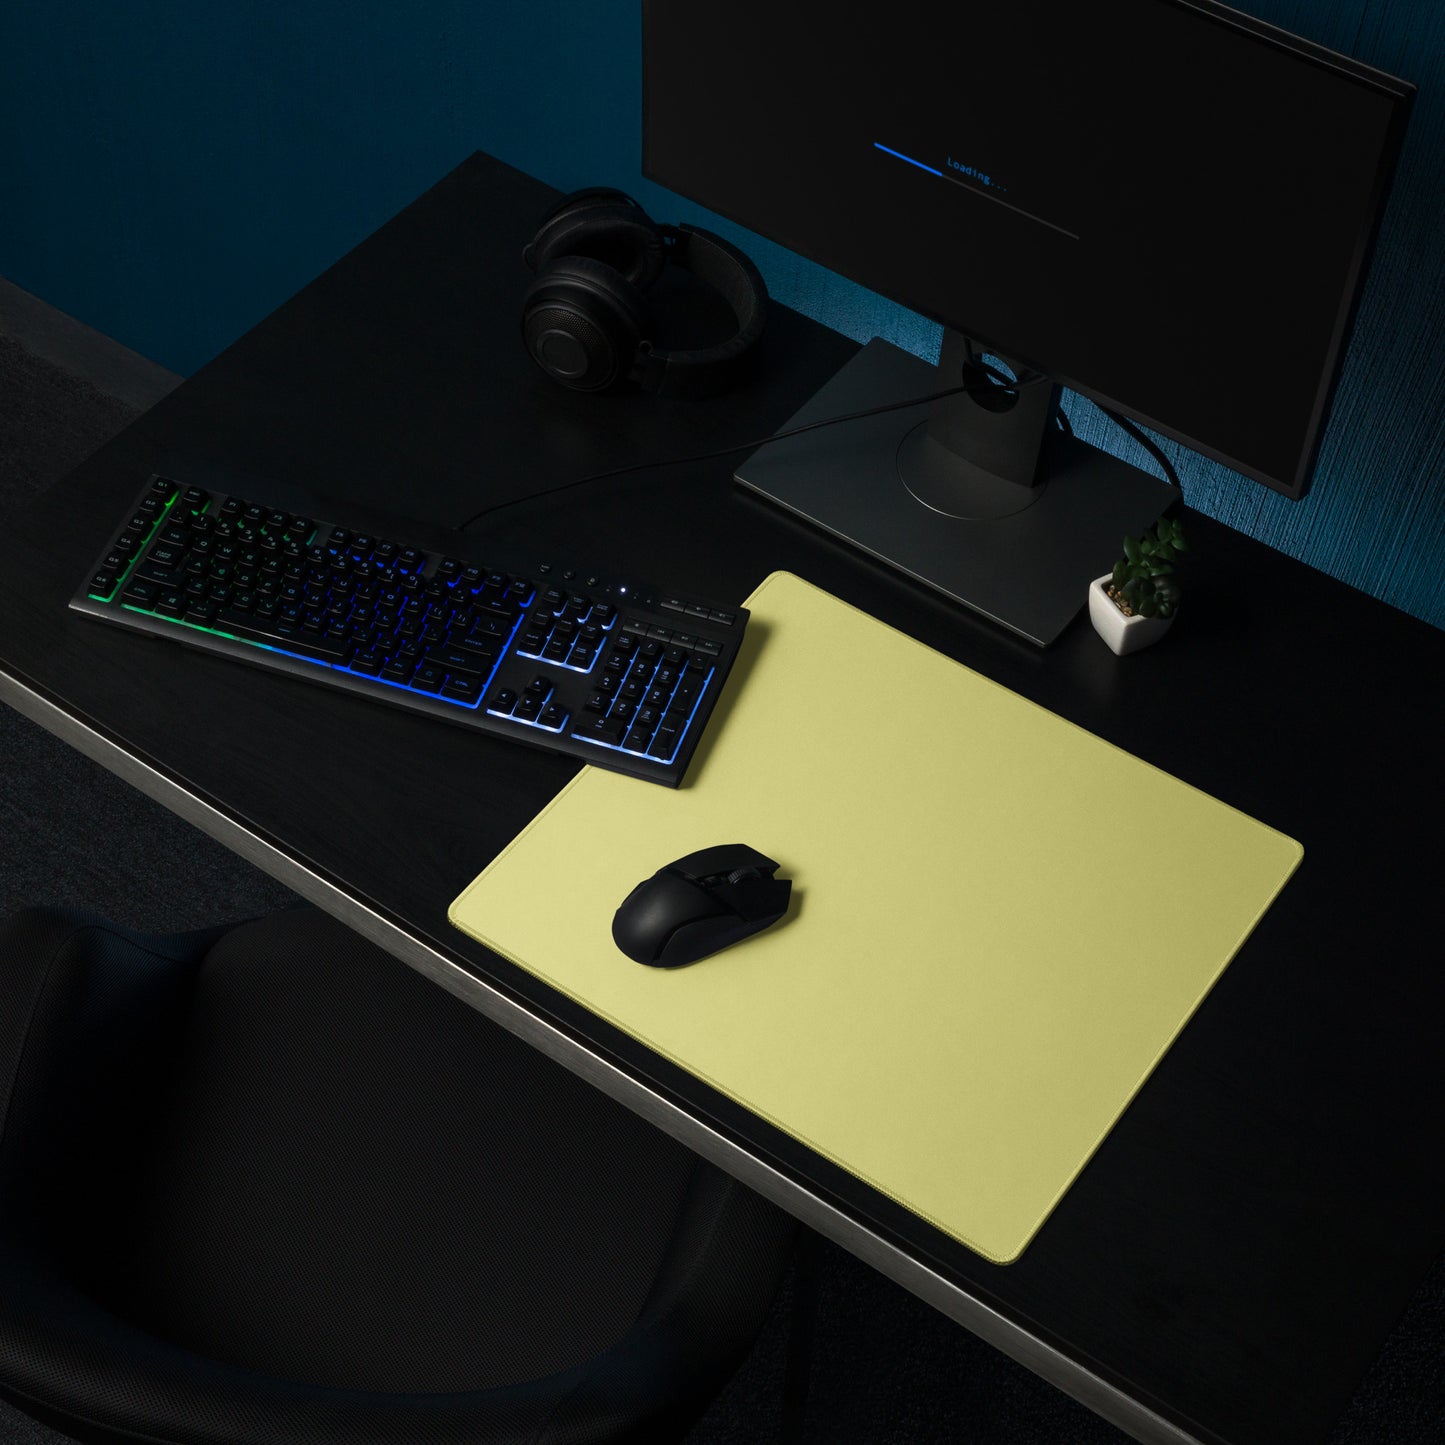 An 18" x 16" yellow gaming desk pad sitting on a black desk with a monitor, keyboard, and mouse.